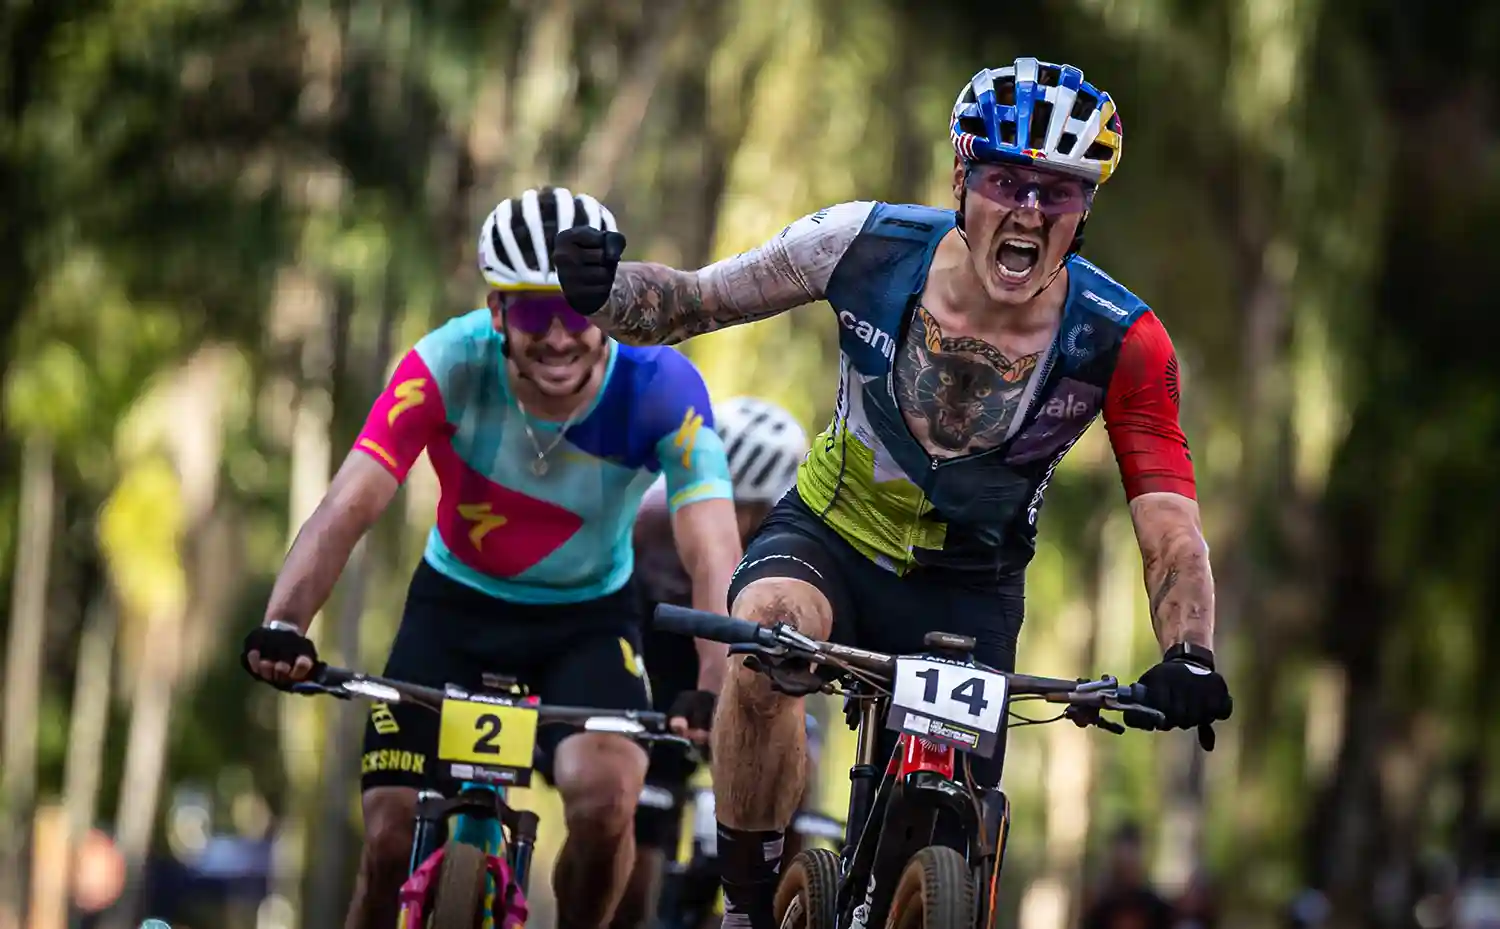 Simon Andreassen and Haley Batten win the 2nd MTB World Cup race